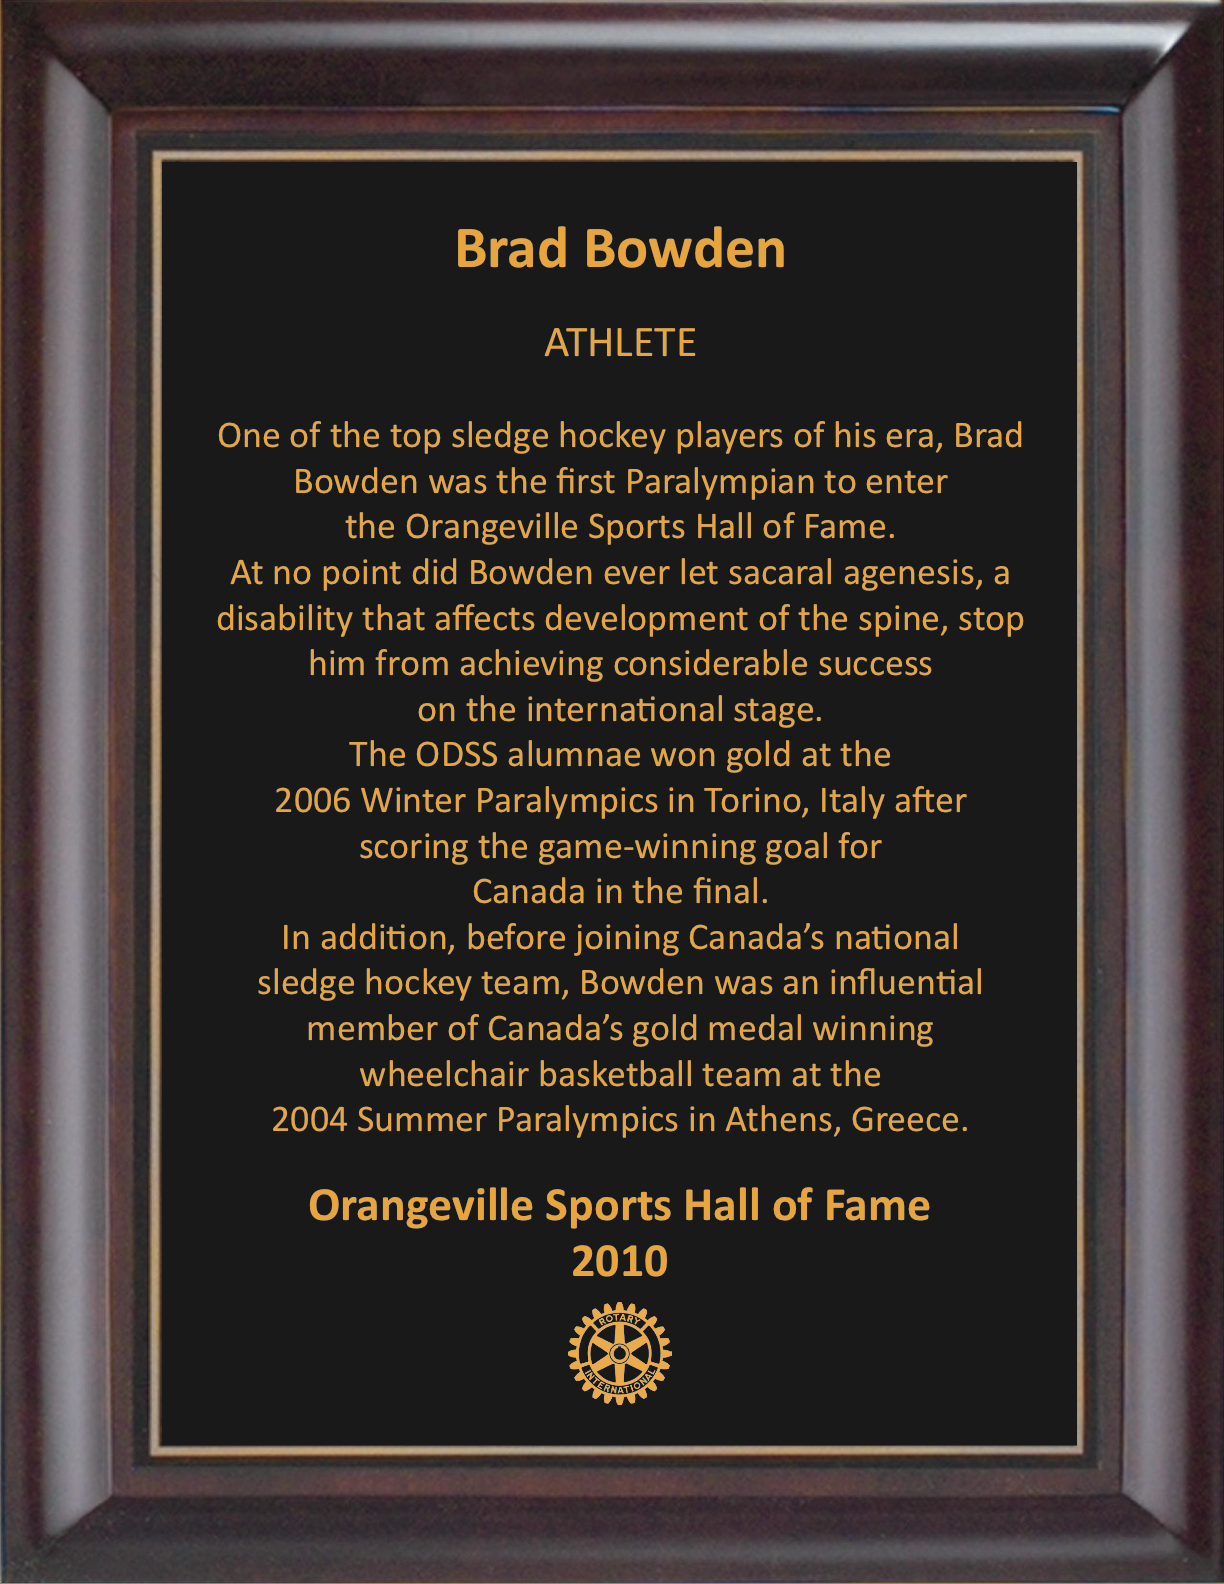 Brad Bowden 2010 Hall of Fame Plaque